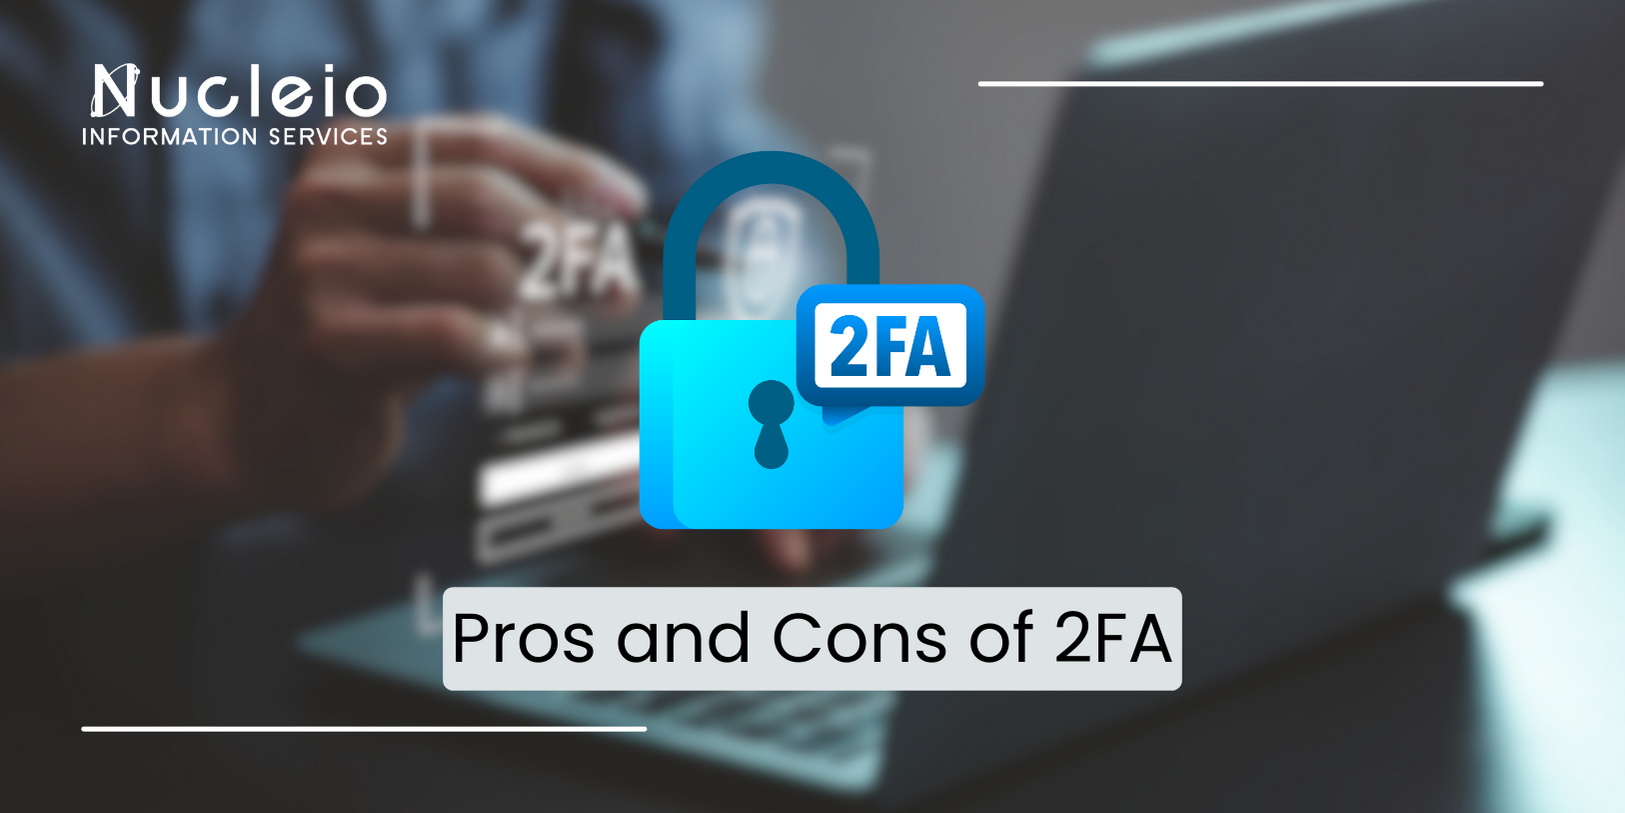 Pros and Cons of 2FA